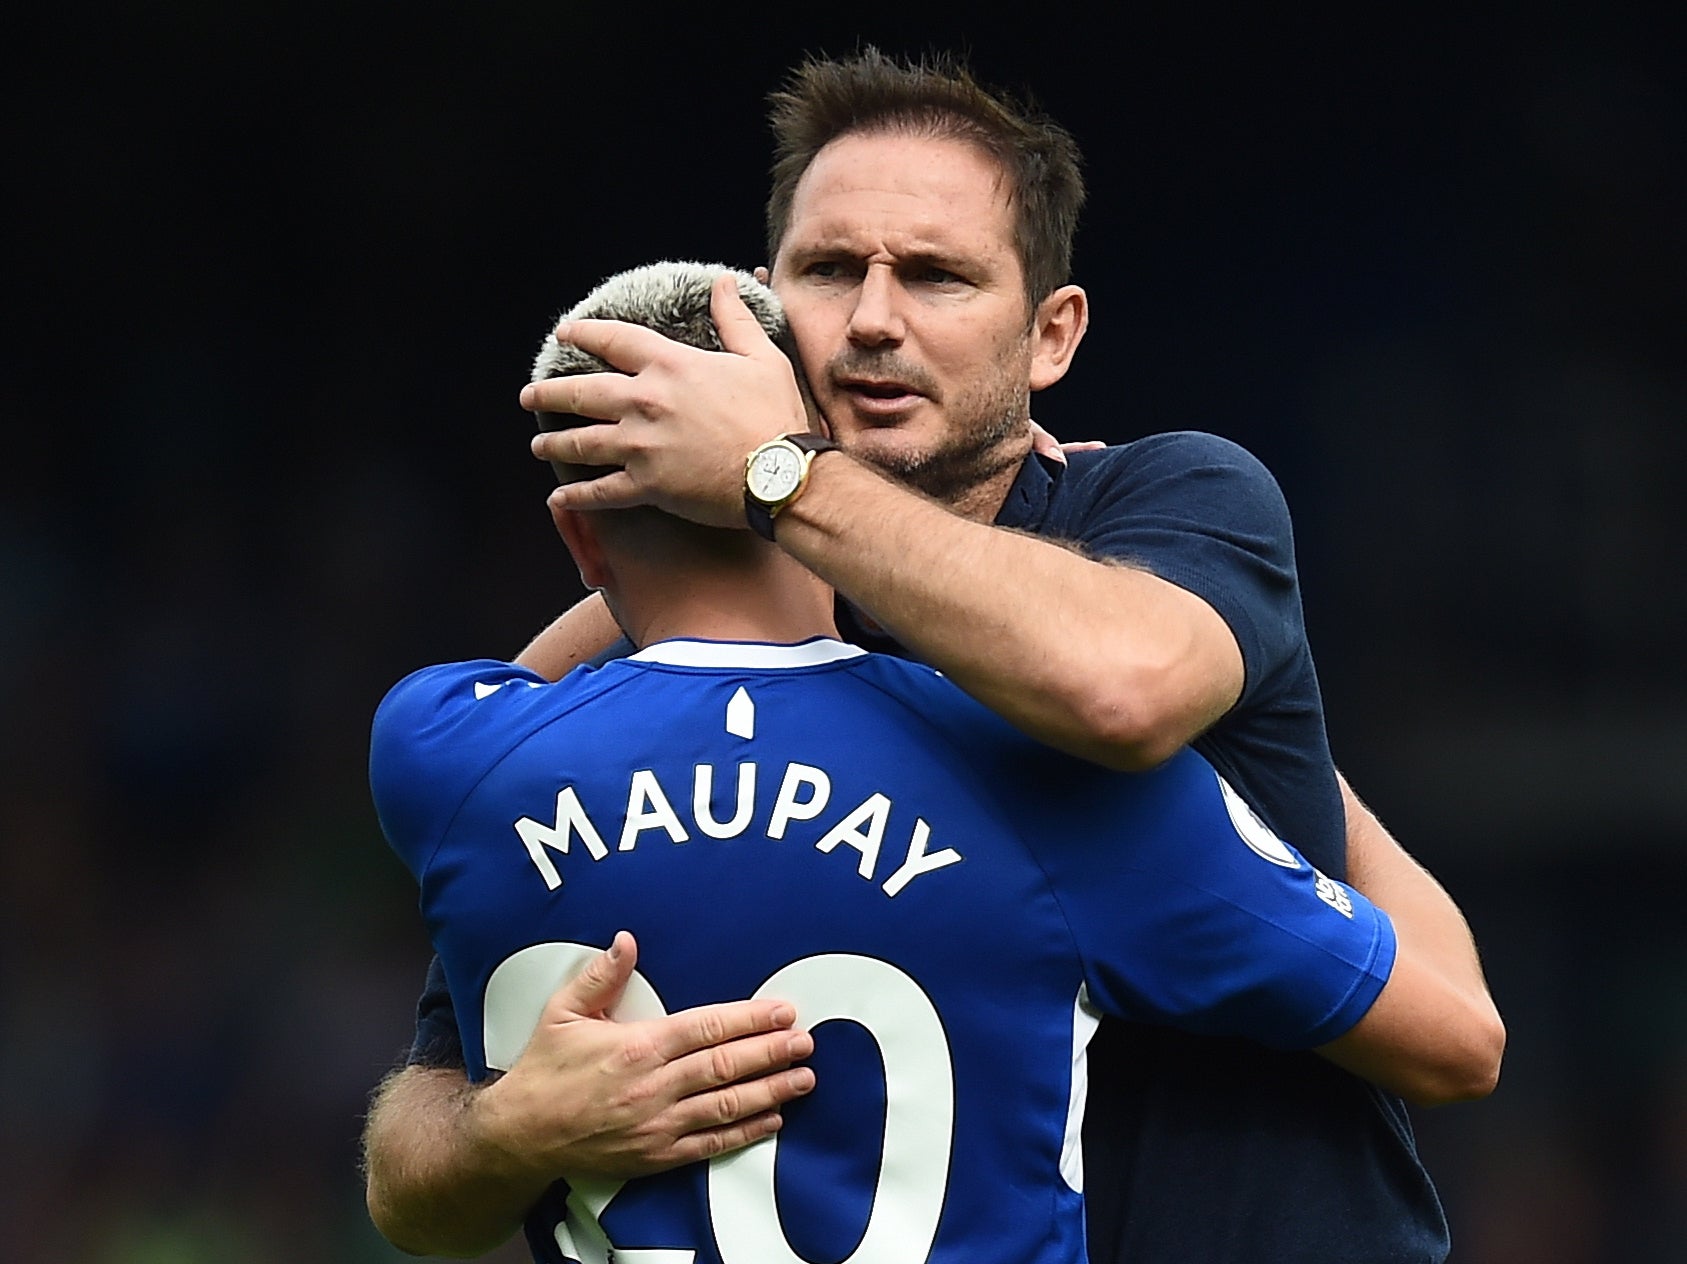 Everton are showing signs of improvement under Frank Lampard